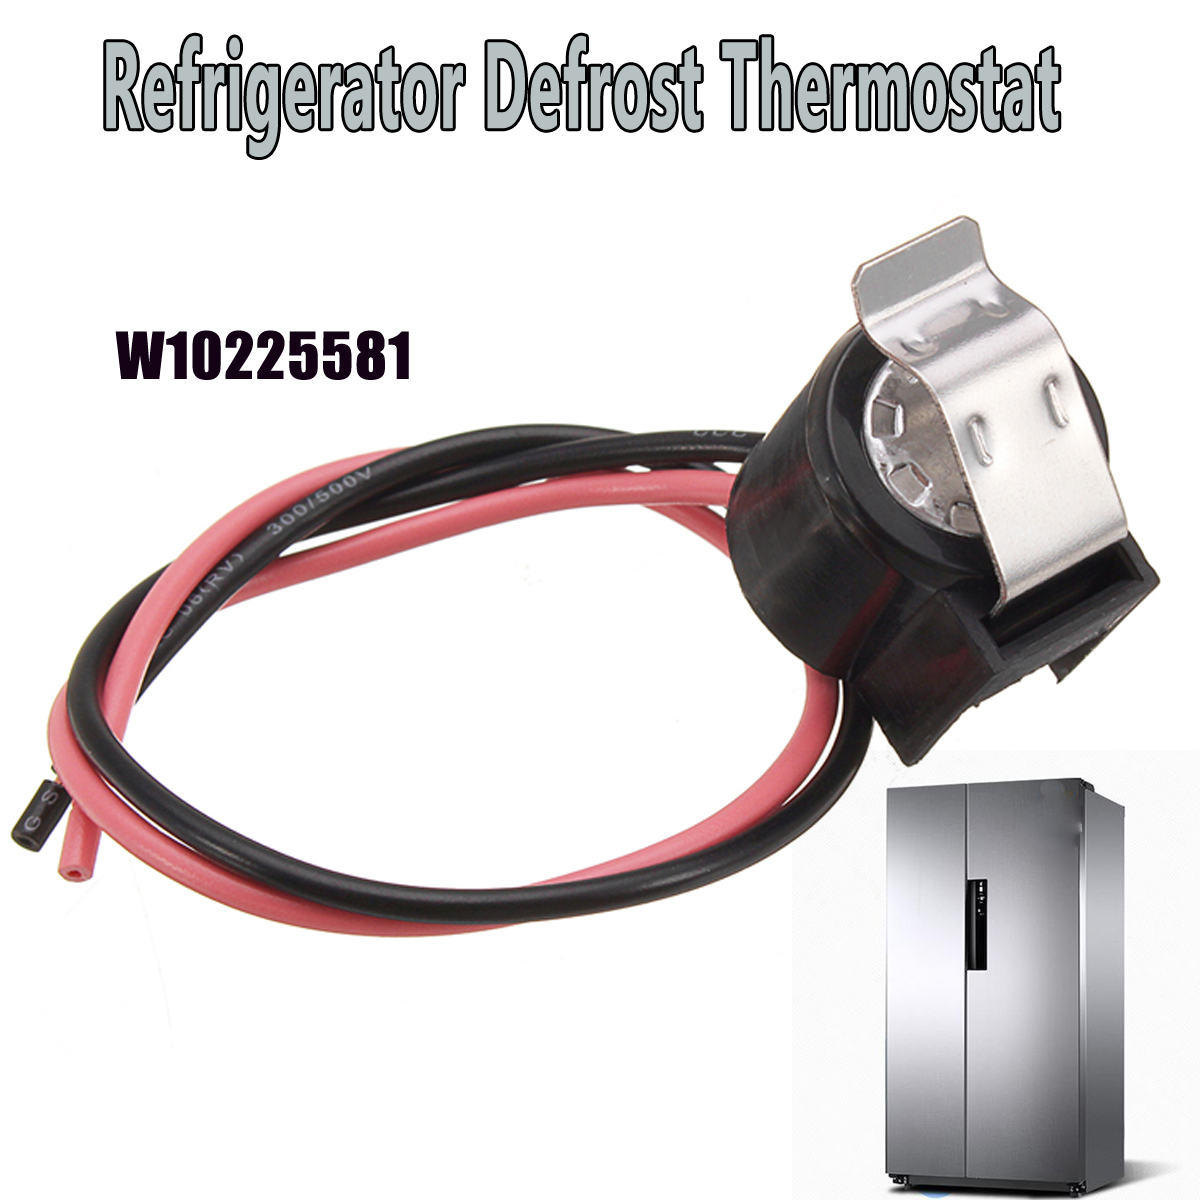 Refrigerator-Defrost-Thermostat-Replacement-For-Whirlpool-Kenmore-W10225581-1364764-2